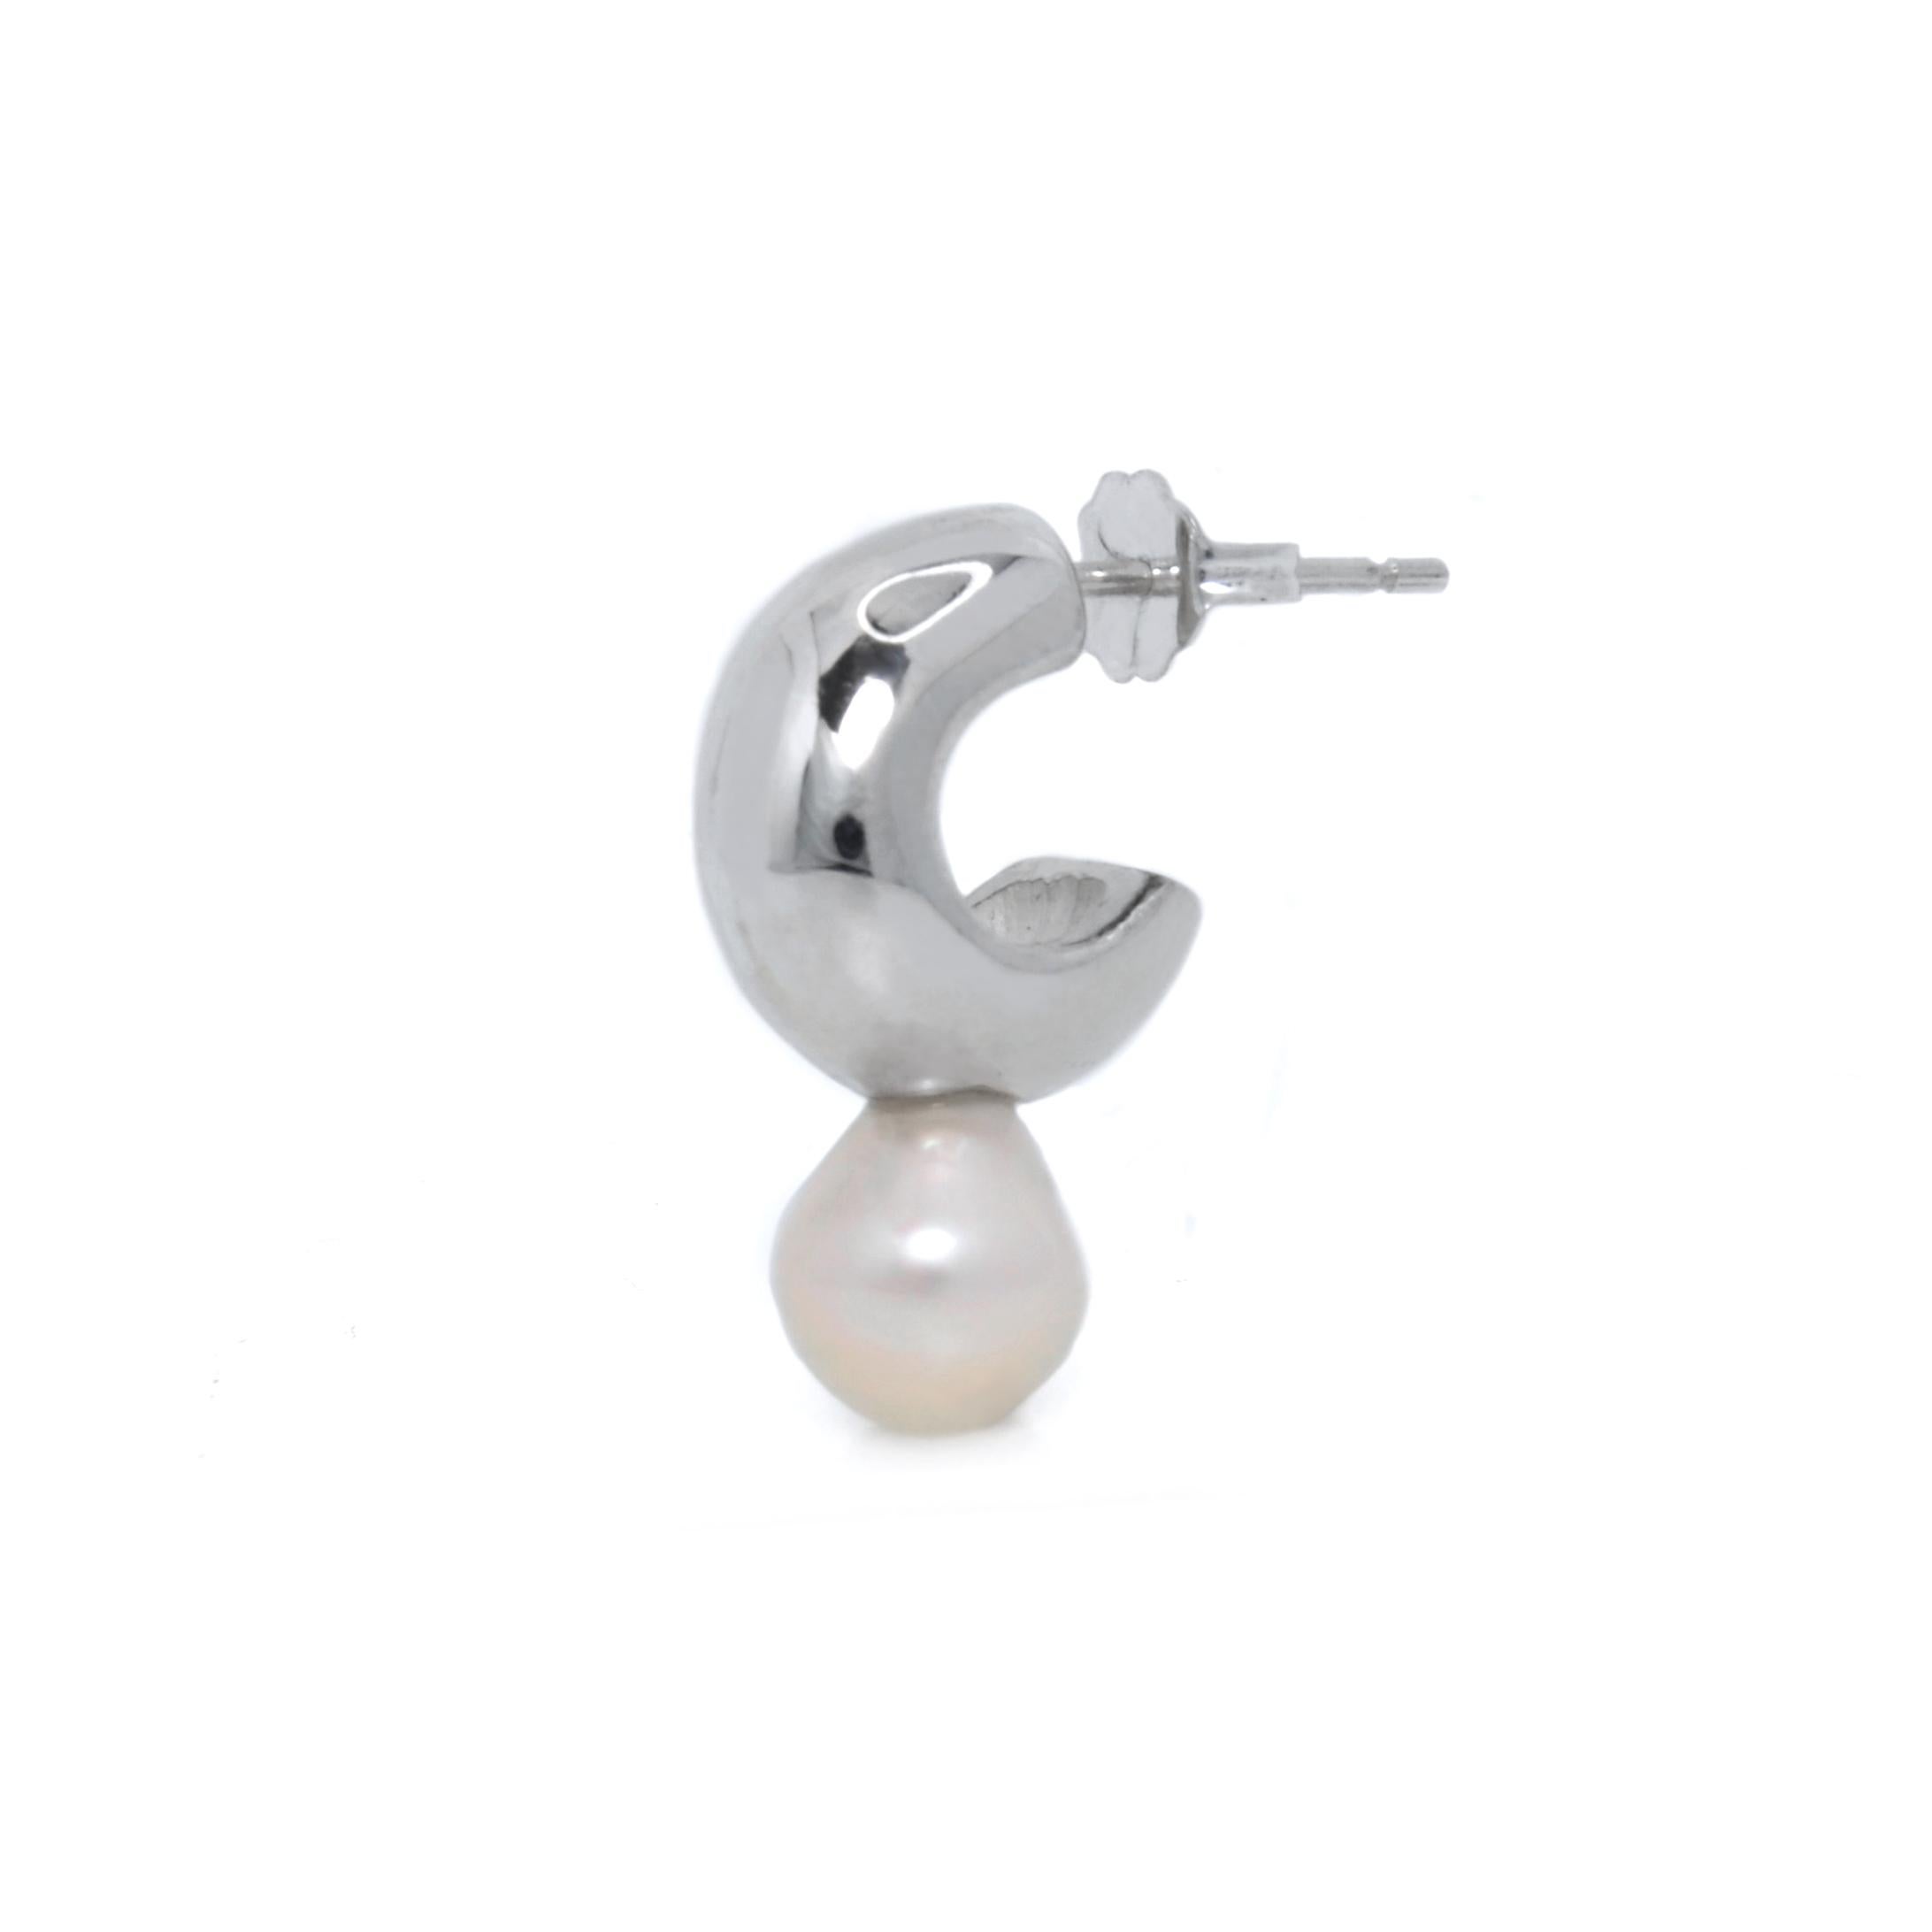 The Melu Huggies, fresh water pearl hoop earrings featuring tear drop pearls in a design that calls to mind the mysterious and mystical sirens of folklore.

Meticulously handcrafted from sterling silver. Pearls may vary slightly in shape and luster